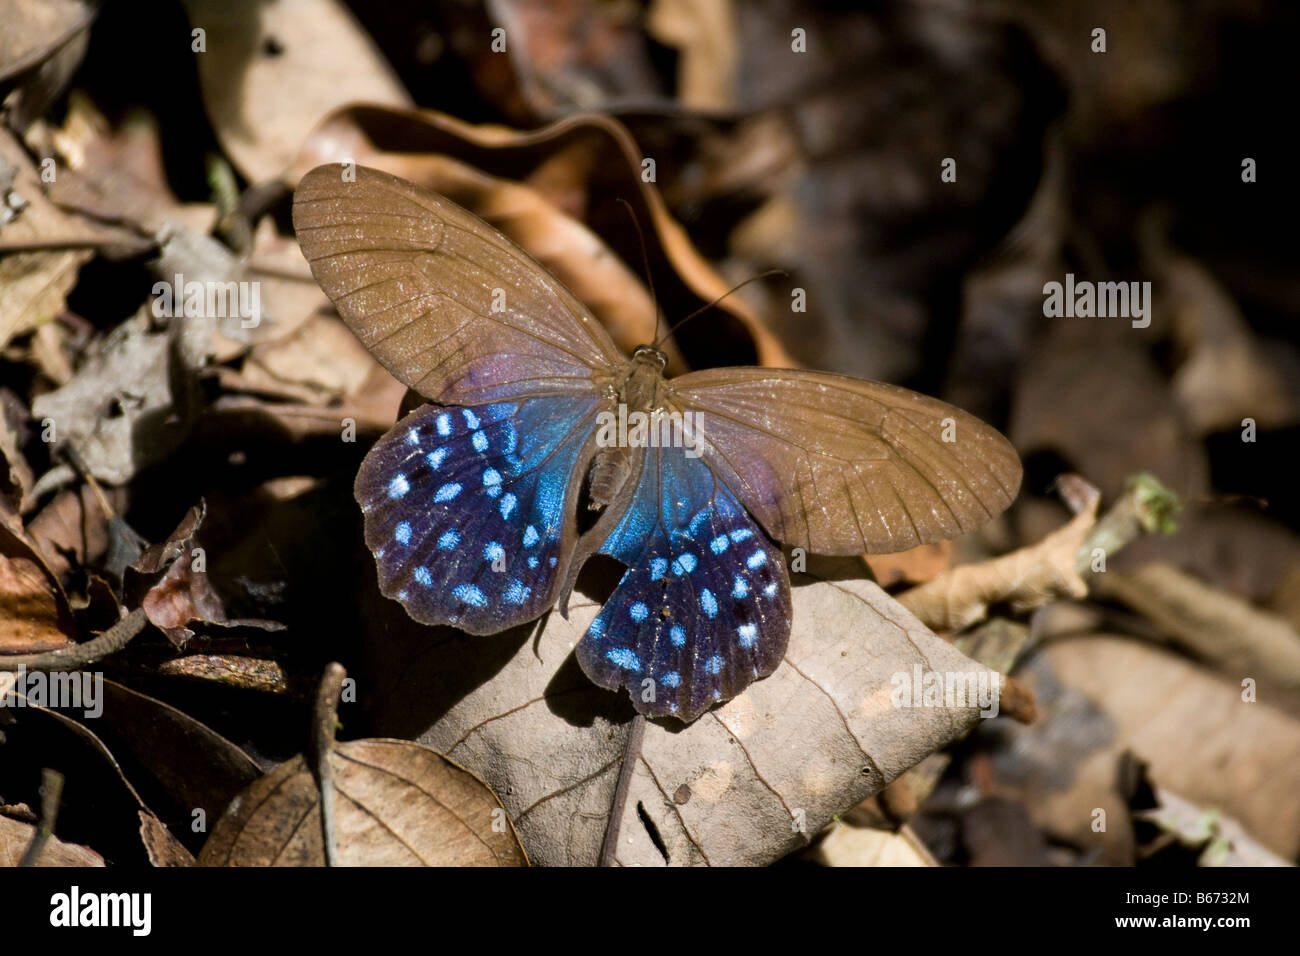 Large blue and brown butterfly on dead leaves. Amazone rain forest, Amazonia Ecuador.Horizontal. 70756 Ecuador Stock Photo